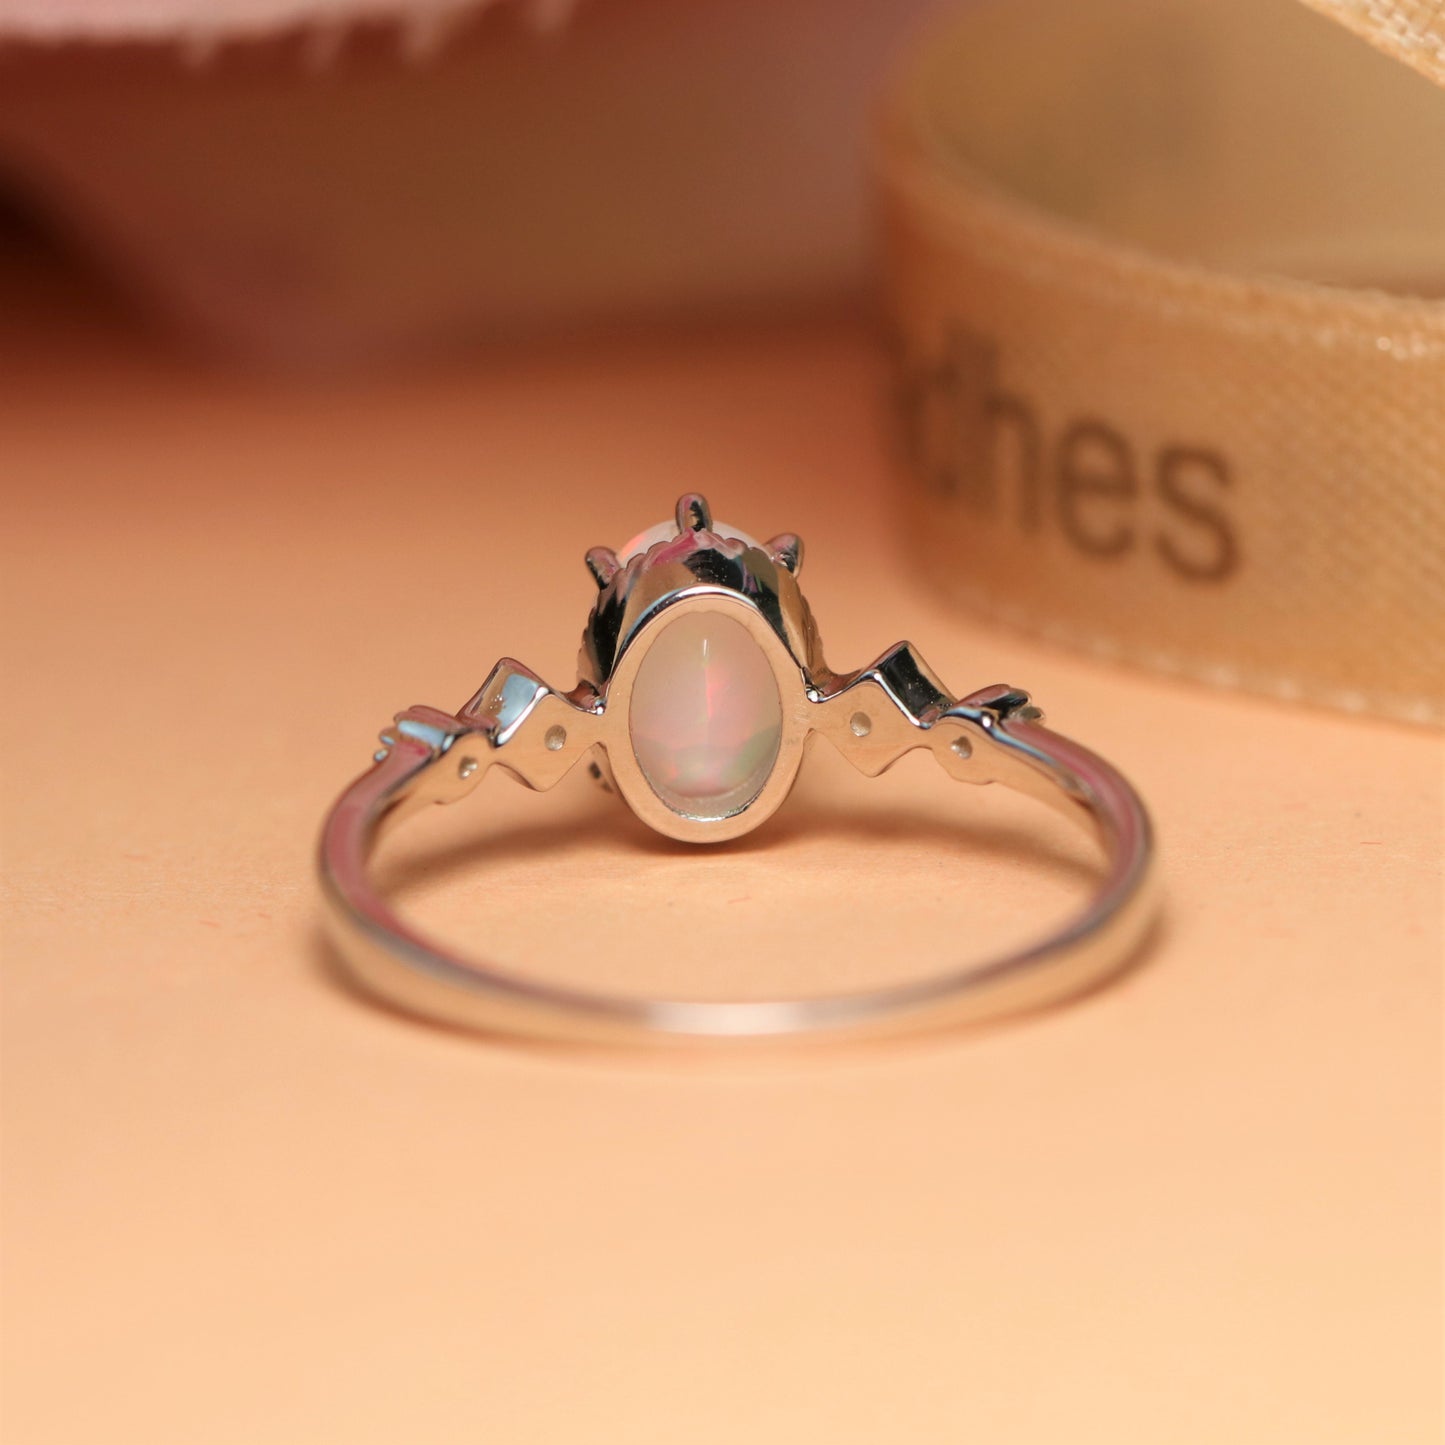 Square and Dot 1 Carat Oval Cut Opal Milgrain Bezel Wedding Engagement Ring with Diamonds in Gold on Sale